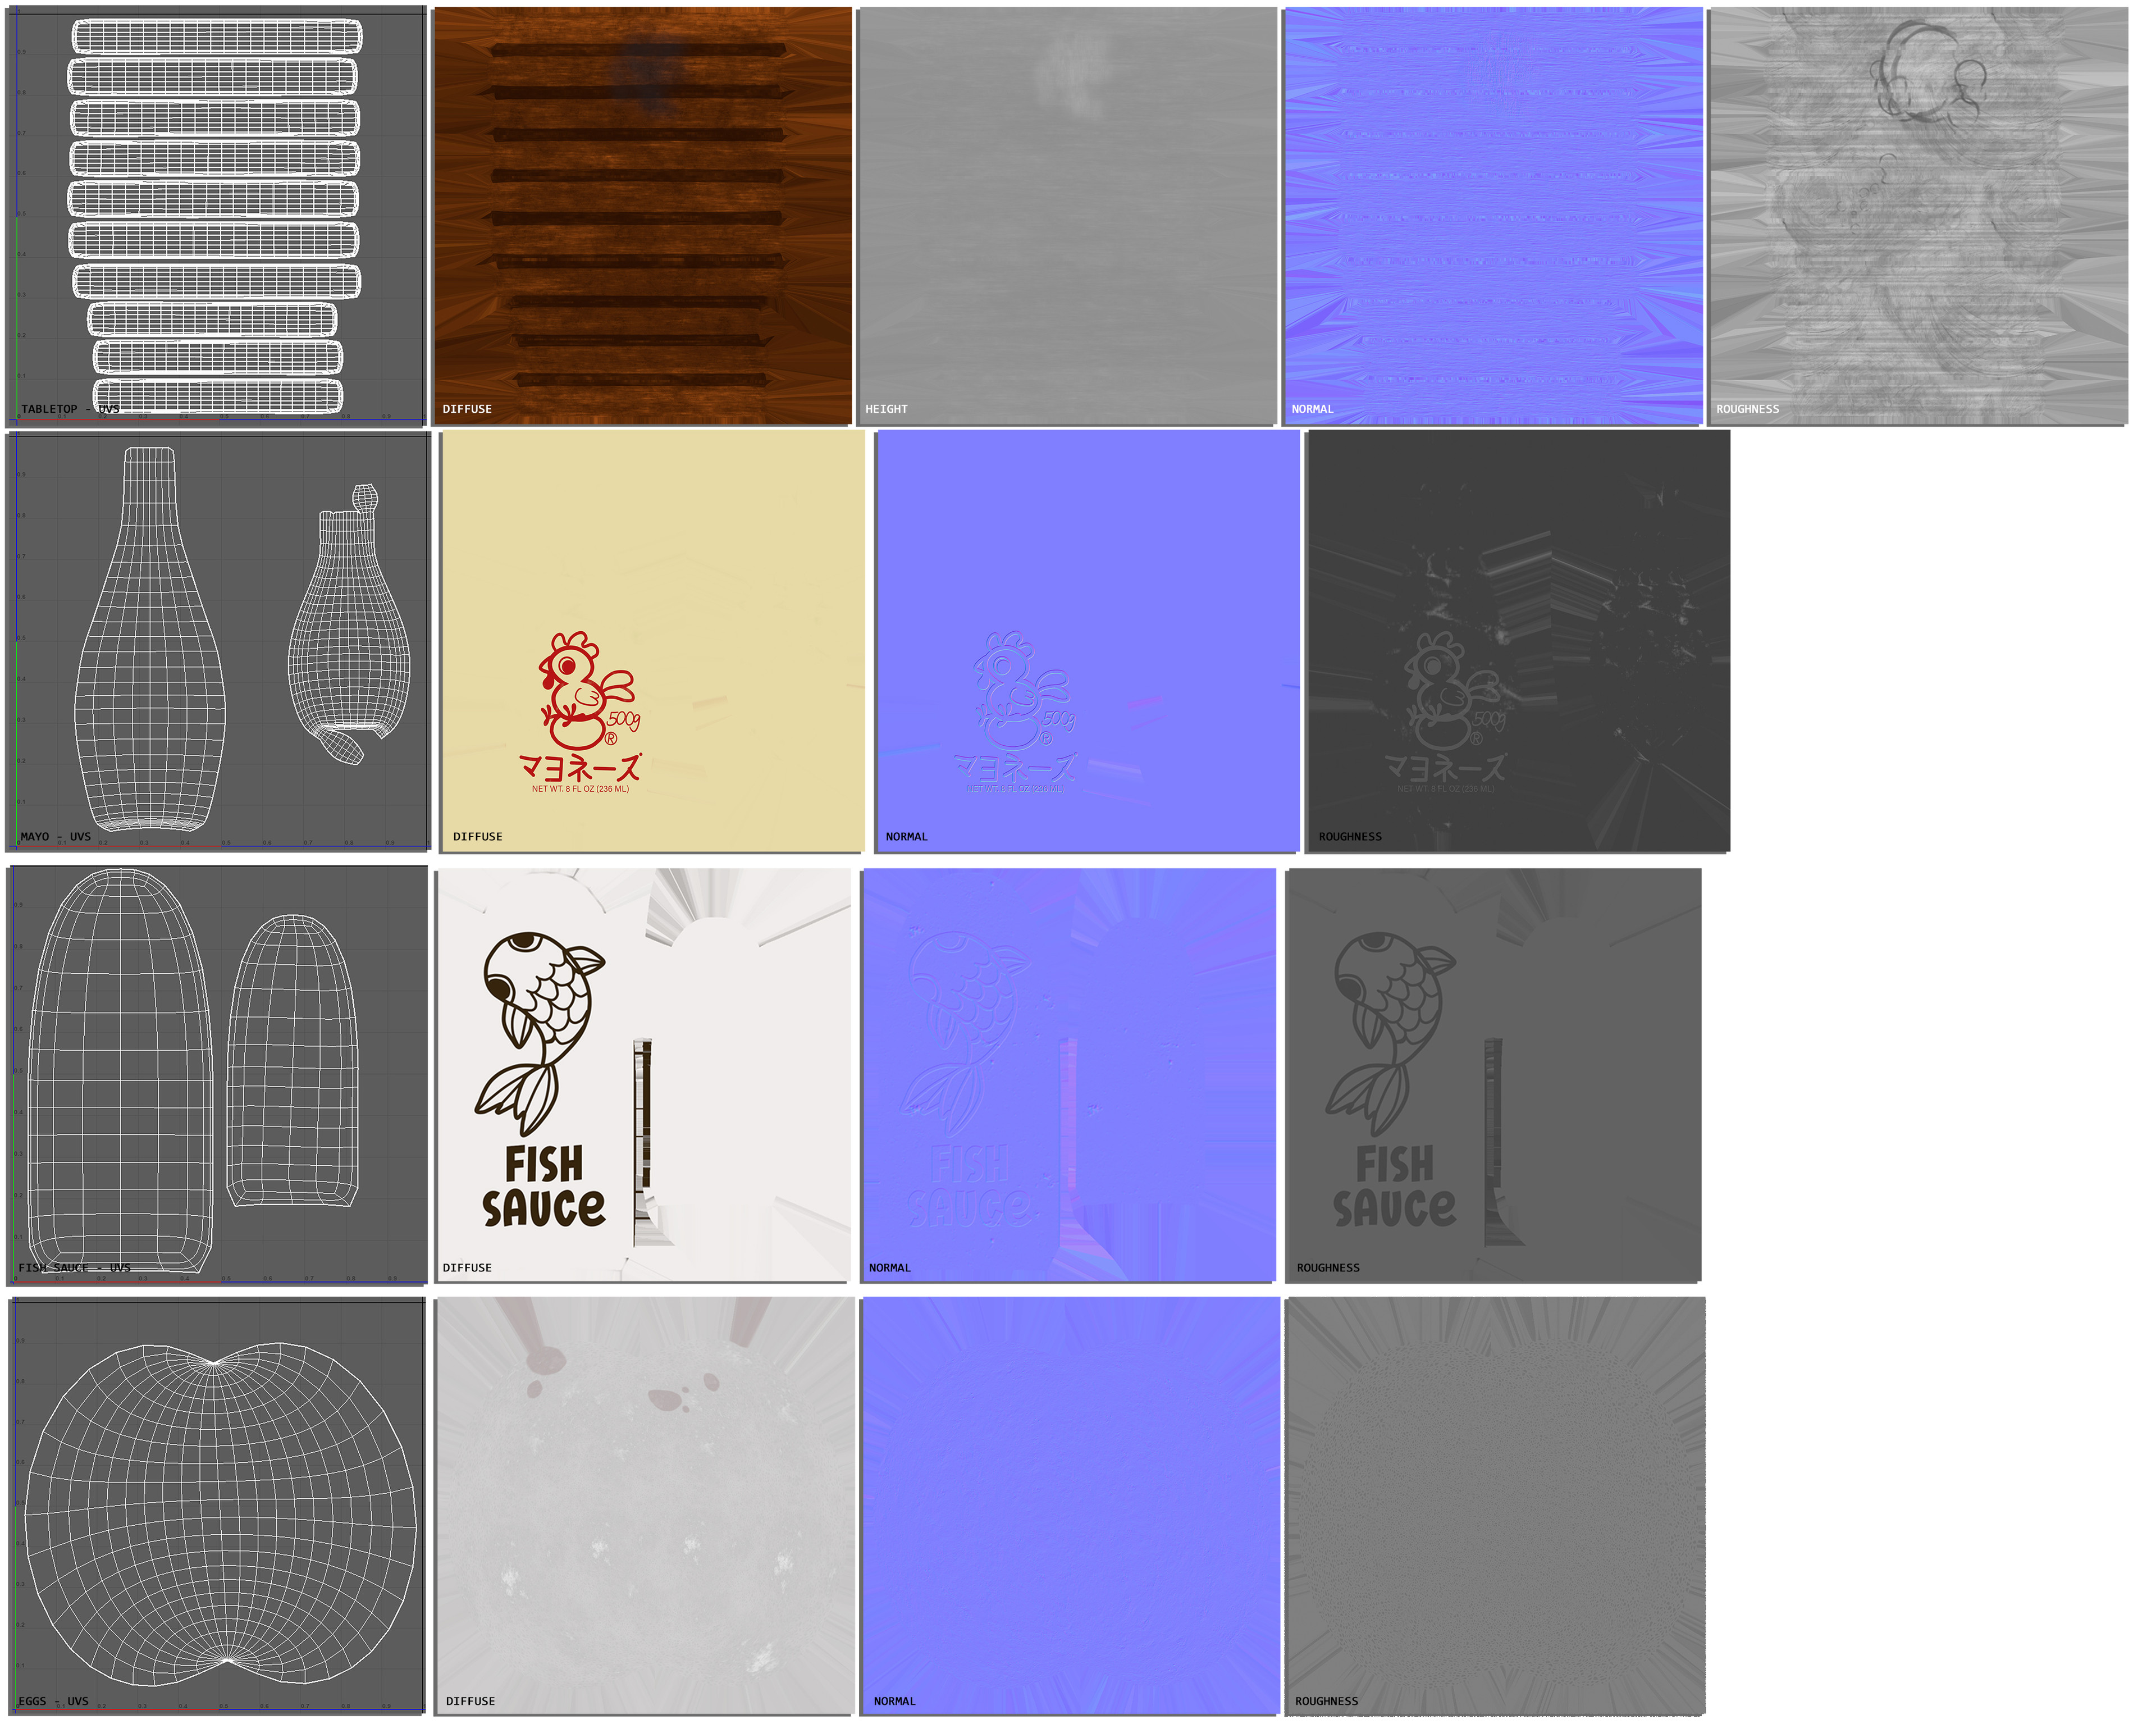 UV layouts and texture maps for tabletop, mayo bottle, fish sauce bottle, and eggs